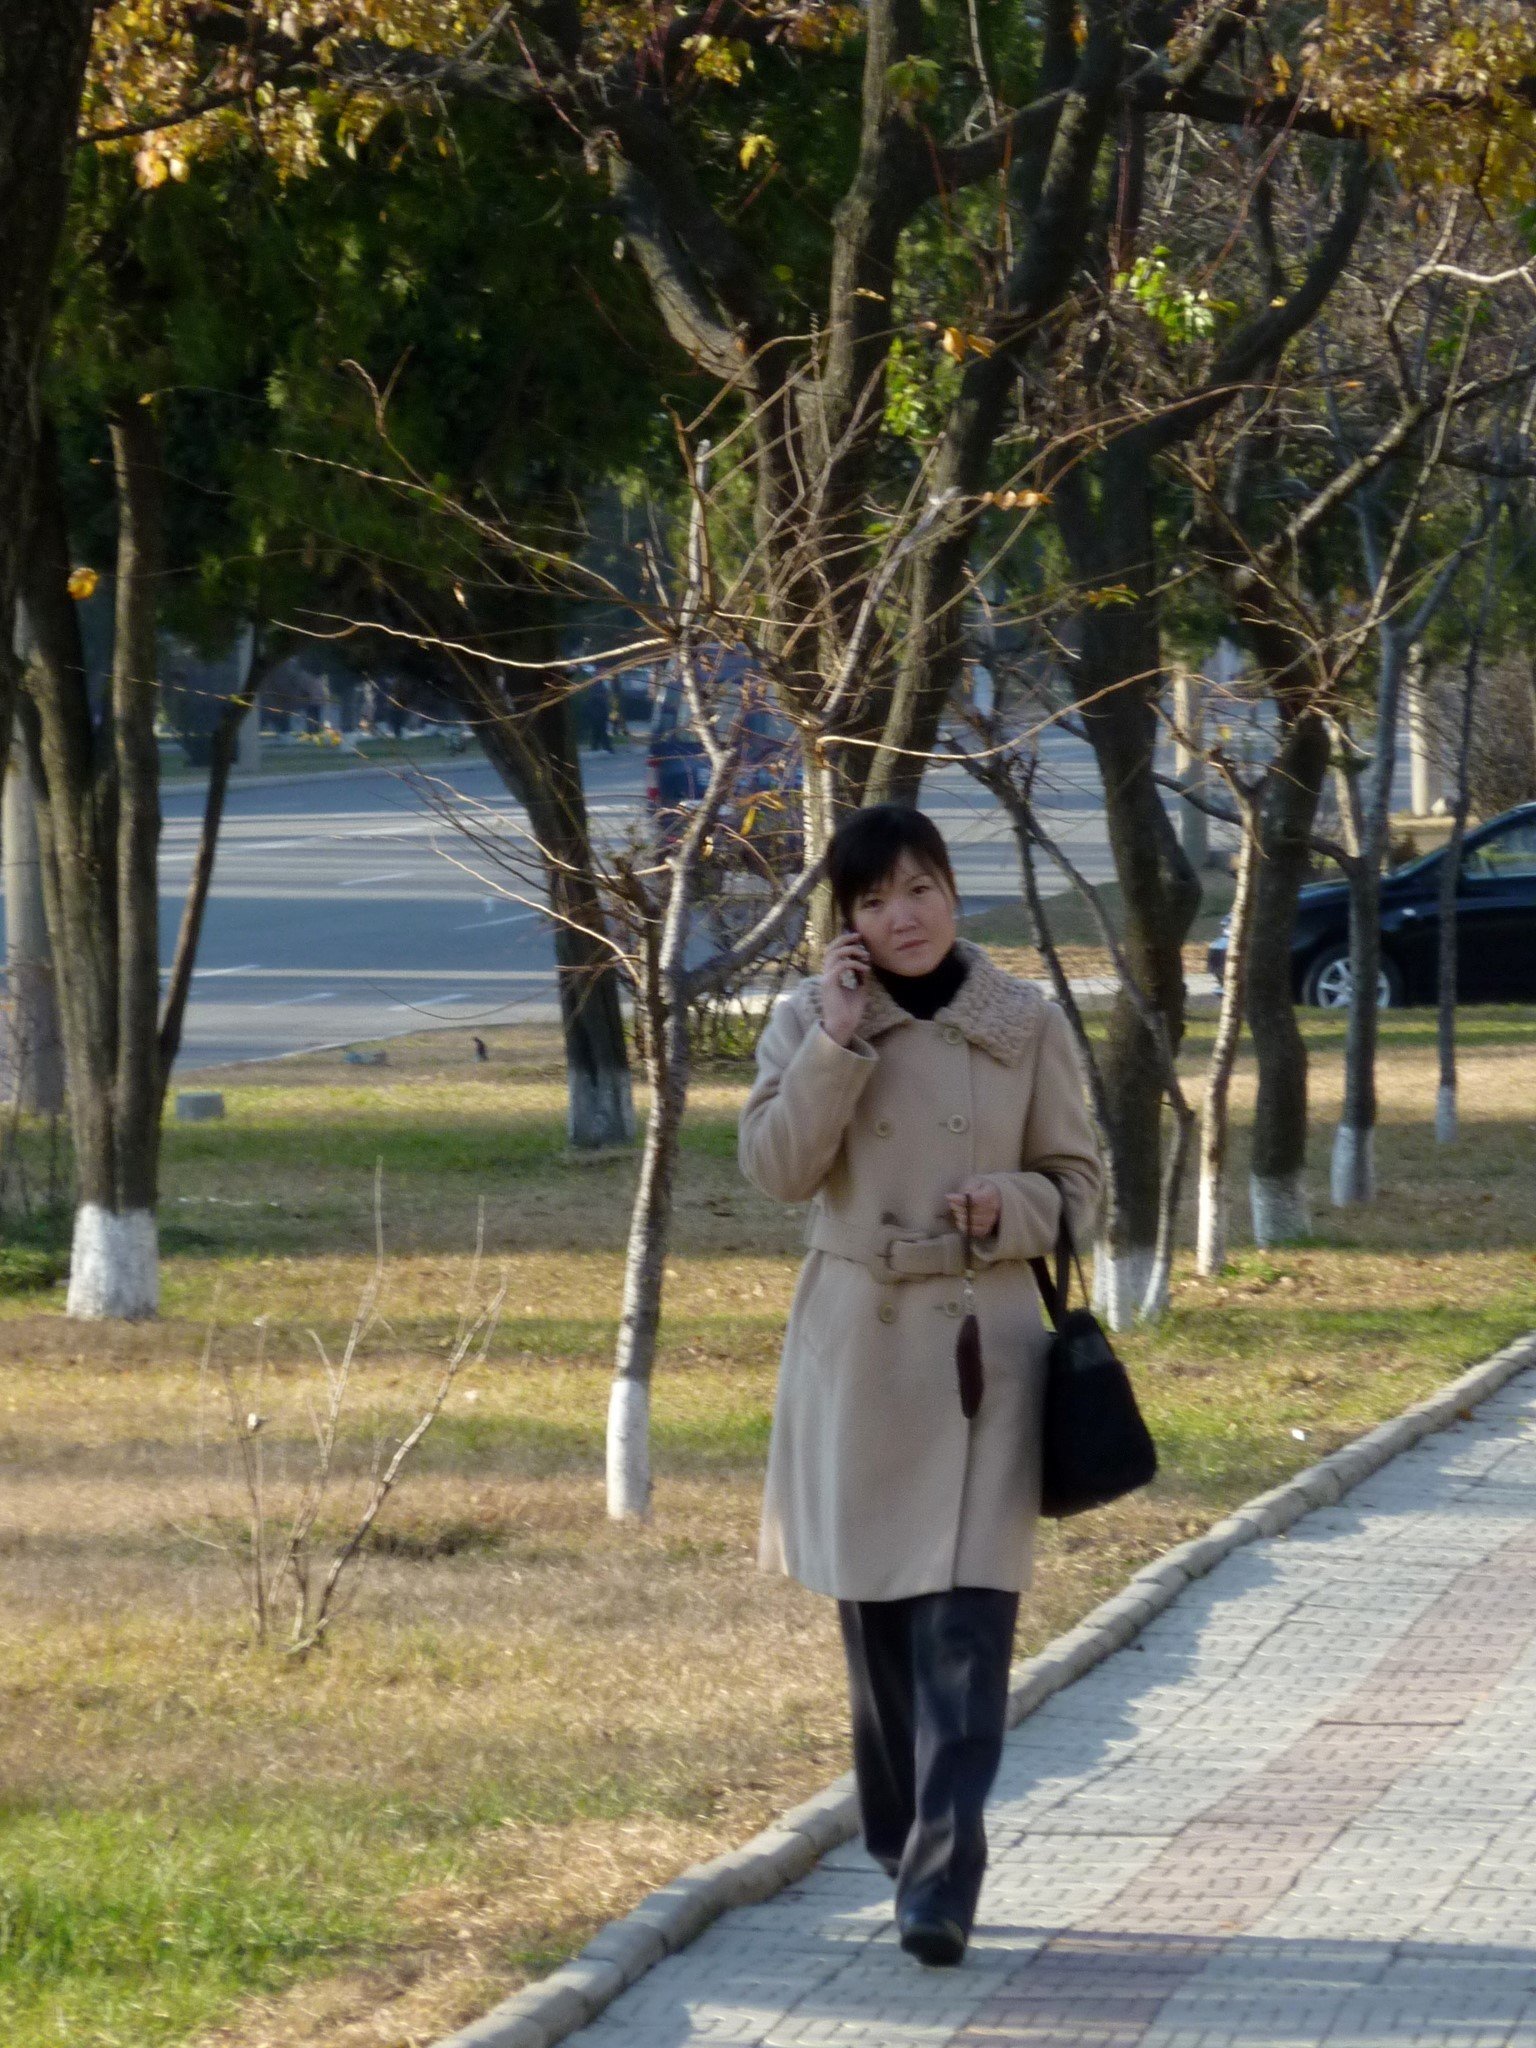 Young professional woman using a cell phone on a sidewalk with trees in the background